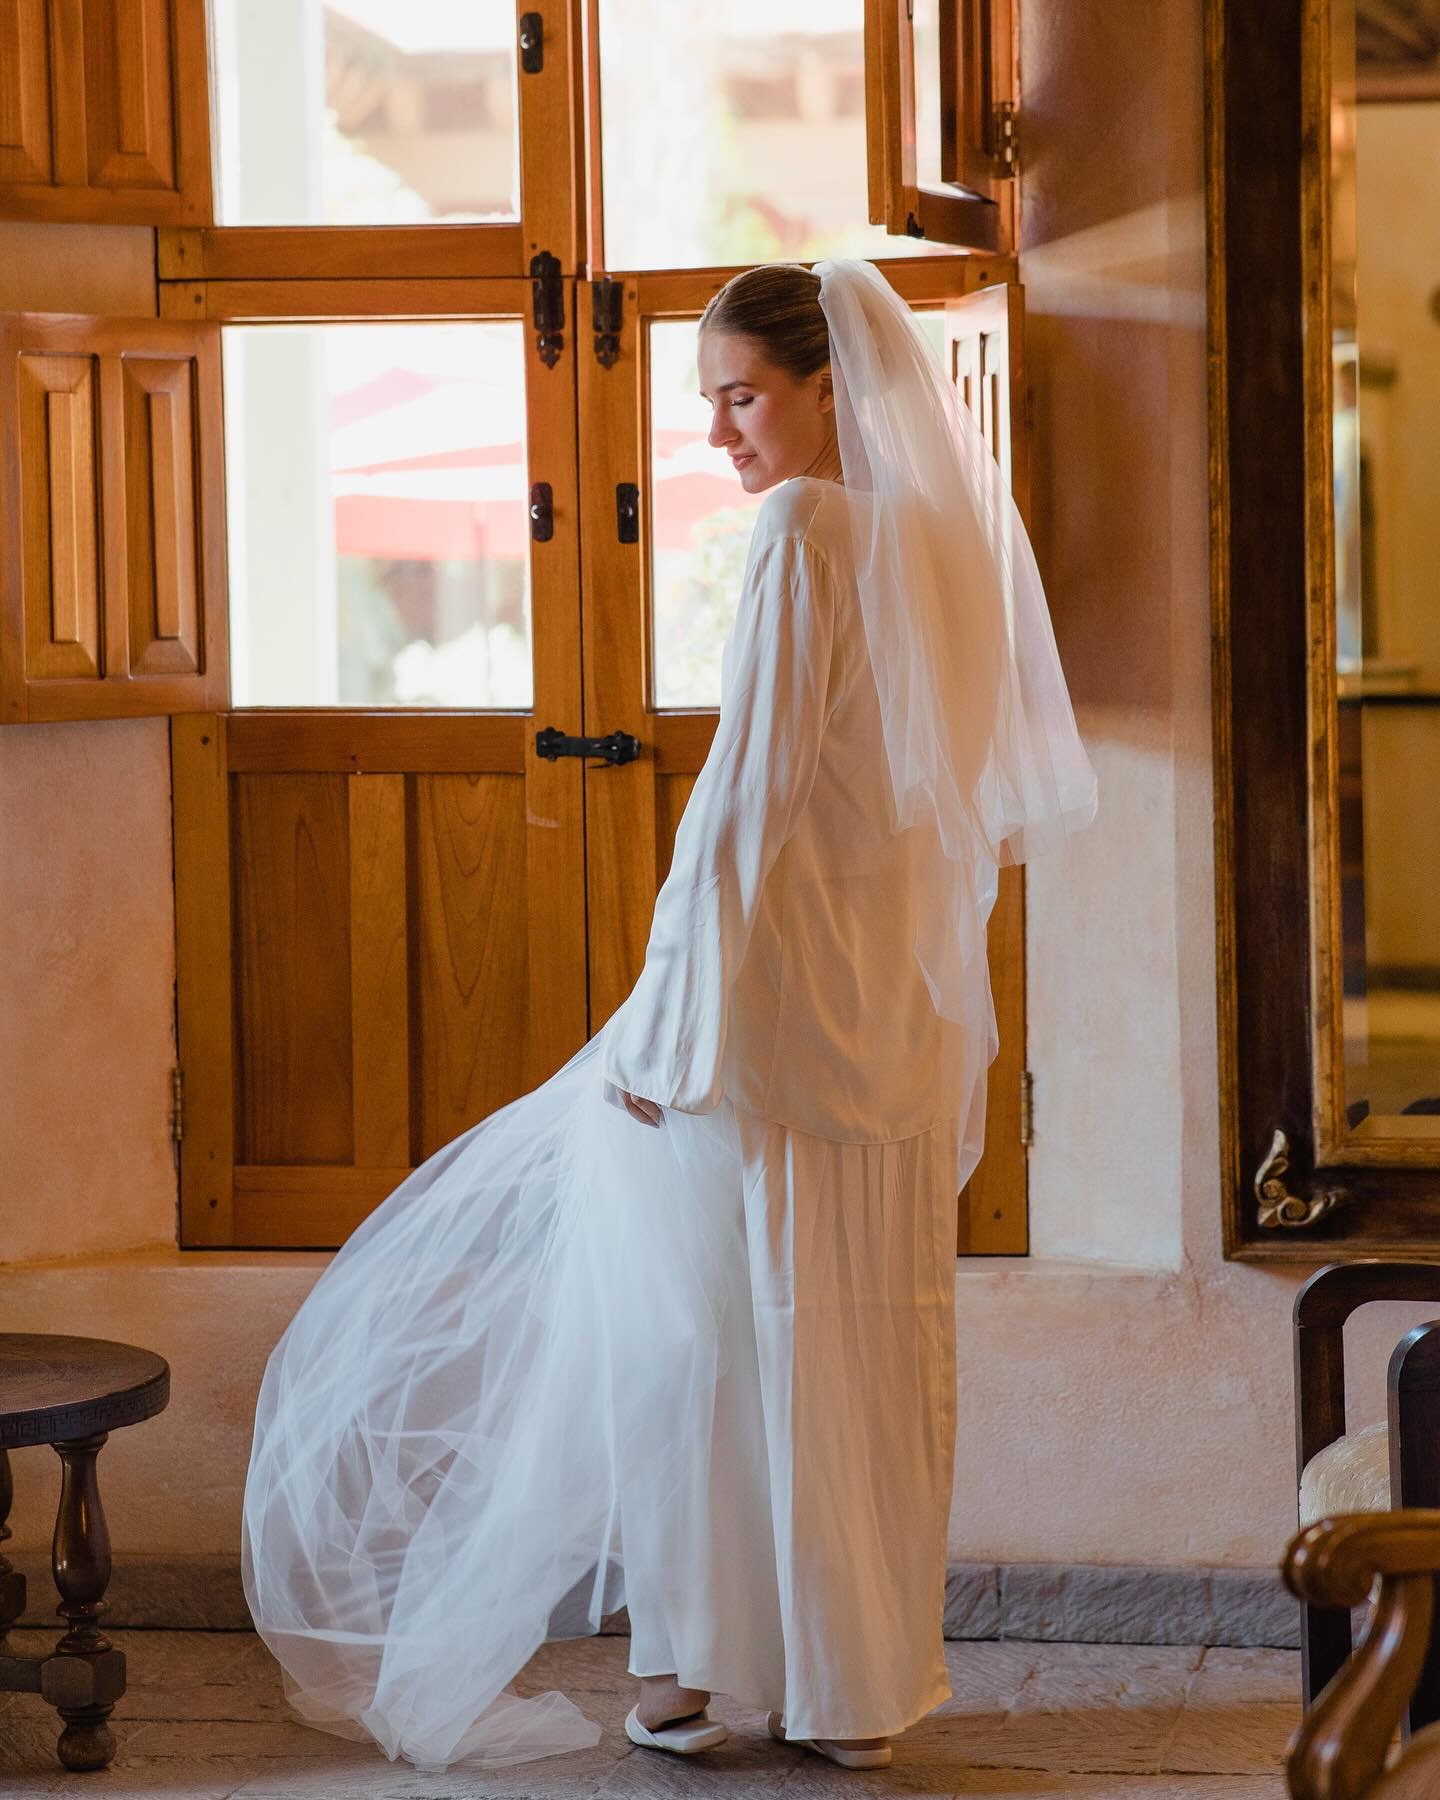 Carolina in our Cathedral Two tier / Tul Seda / Ivory wedding veil
.
Photo @conte.mx